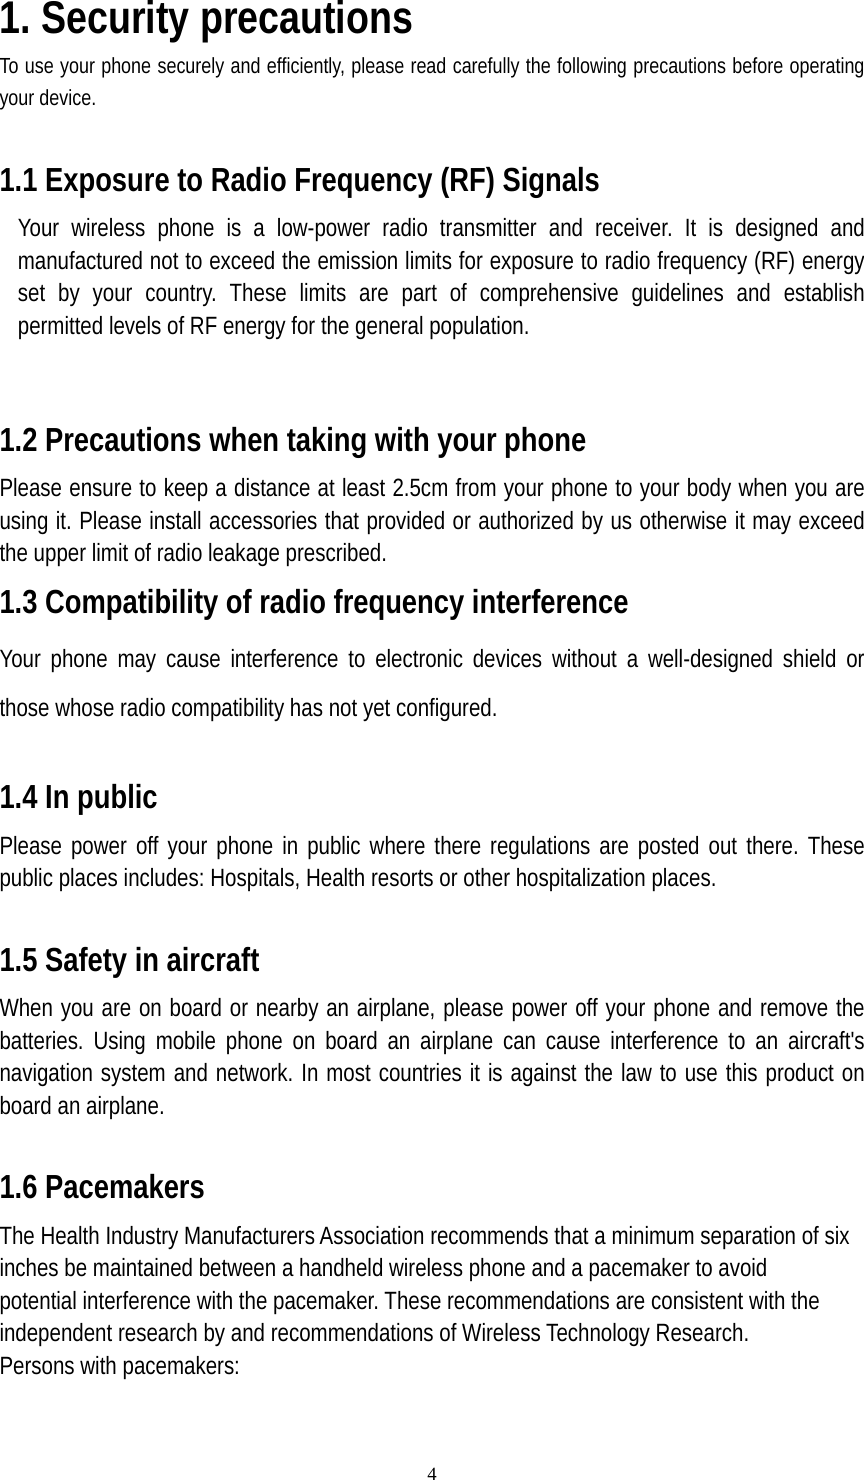   41. Security precautions To use your phone securely and efficiently, please read carefully the following precautions before operating your device.  1.1 Exposure to Radio Frequency (RF) Signals Your wireless phone is a low-power radio transmitter and receiver. It is designed and manufactured not to exceed the emission limits for exposure to radio frequency (RF) energy set by your country. These limits are part of comprehensive guidelines and establish permitted levels of RF energy for the general population.  1.2 Precautions when taking with your phone Please ensure to keep a distance at least 2.5cm from your phone to your body when you are using it. Please install accessories that provided or authorized by us otherwise it may exceed the upper limit of radio leakage prescribed. 1.3 Compatibility of radio frequency interference Your phone may cause interference to electronic devices without a well-designed shield or those whose radio compatibility has not yet configured.  1.4 In public Please power off your phone in public where there regulations are posted out there. These public places includes: Hospitals, Health resorts or other hospitalization places.    1.5 Safety in aircraft When you are on board or nearby an airplane, please power off your phone and remove the batteries. Using mobile phone on board an airplane can cause interference to an aircraft&apos;s navigation system and network. In most countries it is against the law to use this product on board an airplane.  1.6 Pacemakers The Health Industry Manufacturers Association recommends that a minimum separation of six inches be maintained between a handheld wireless phone and a pacemaker to avoid potential interference with the pacemaker. These recommendations are consistent with the independent research by and recommendations of Wireless Technology Research. Persons with pacemakers: 